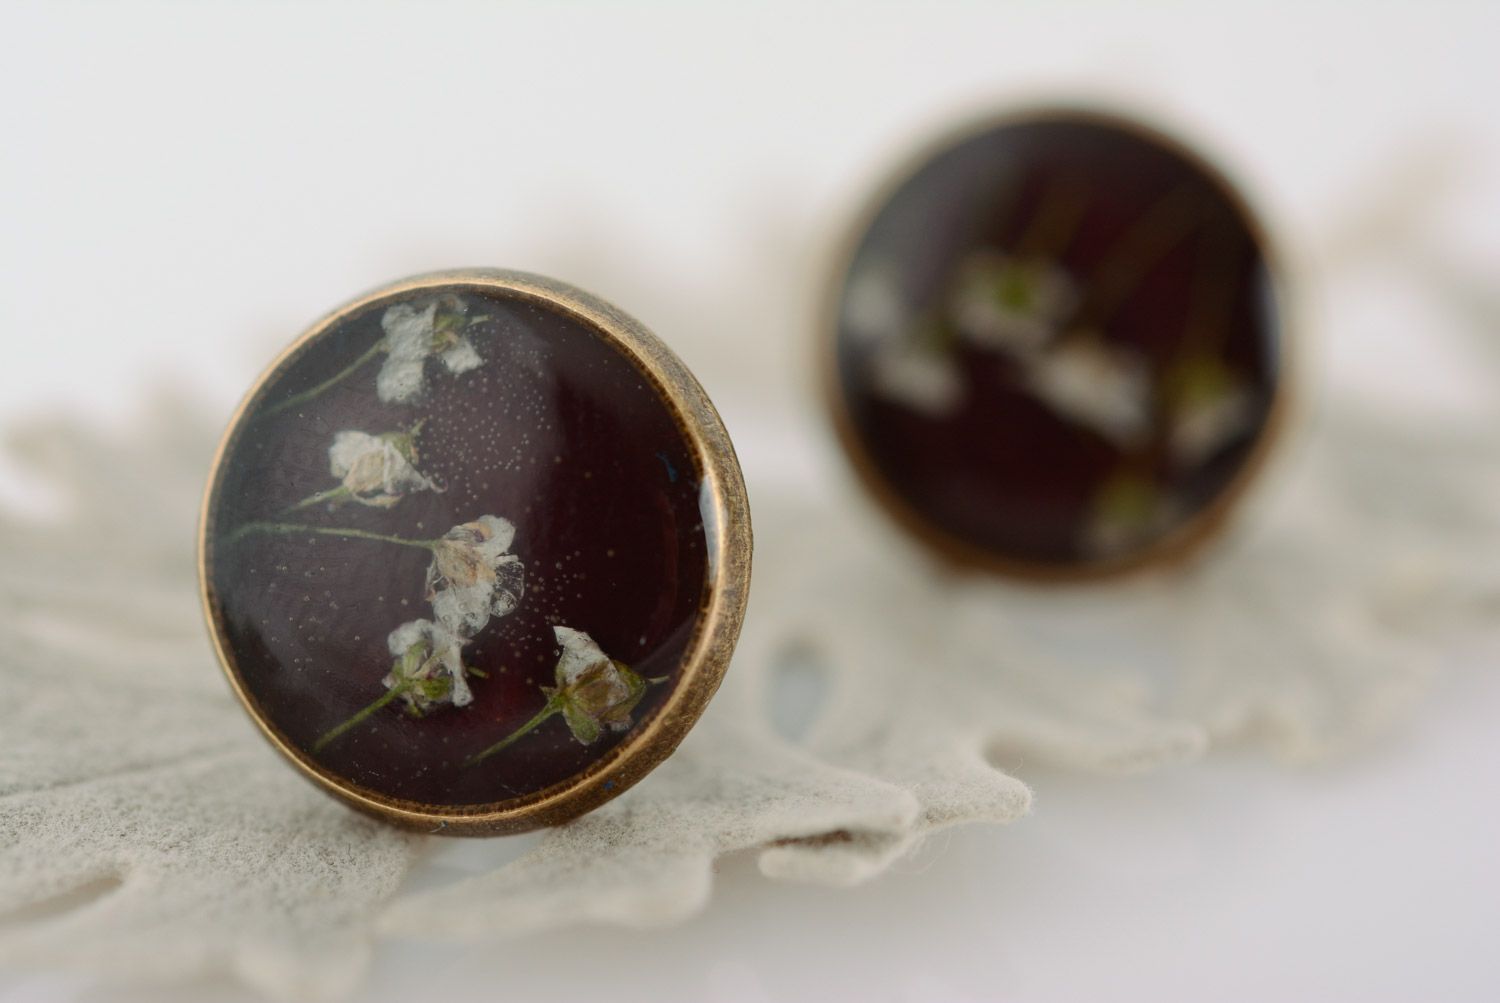 Small flat round dark homemade stud earrings with dried flowers in epoxy resin  photo 1